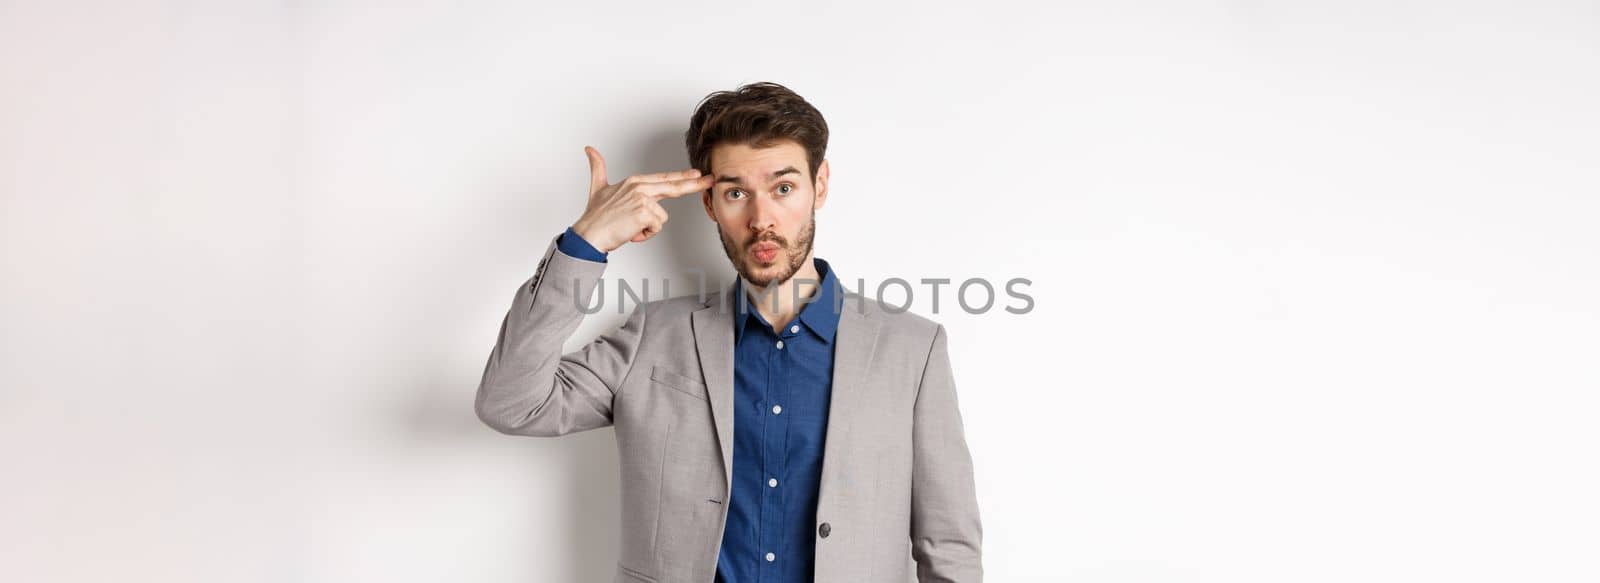 Annoyed guy in business suit shoot himself with hand gun near head, look distressed and tired after work, standing on white background.